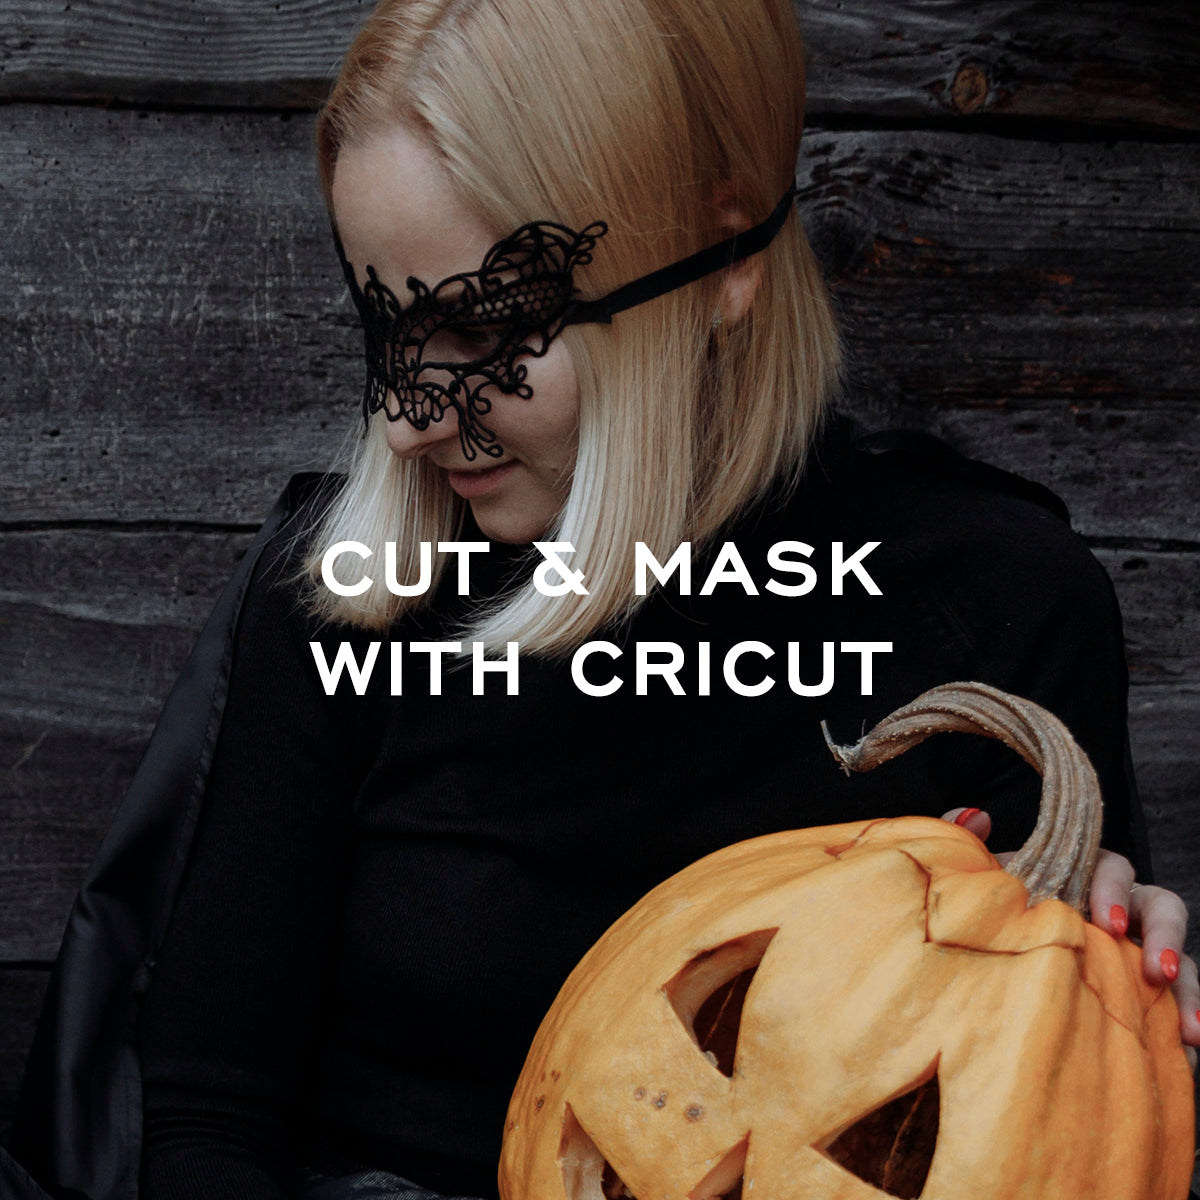 Cut and mask with cricut